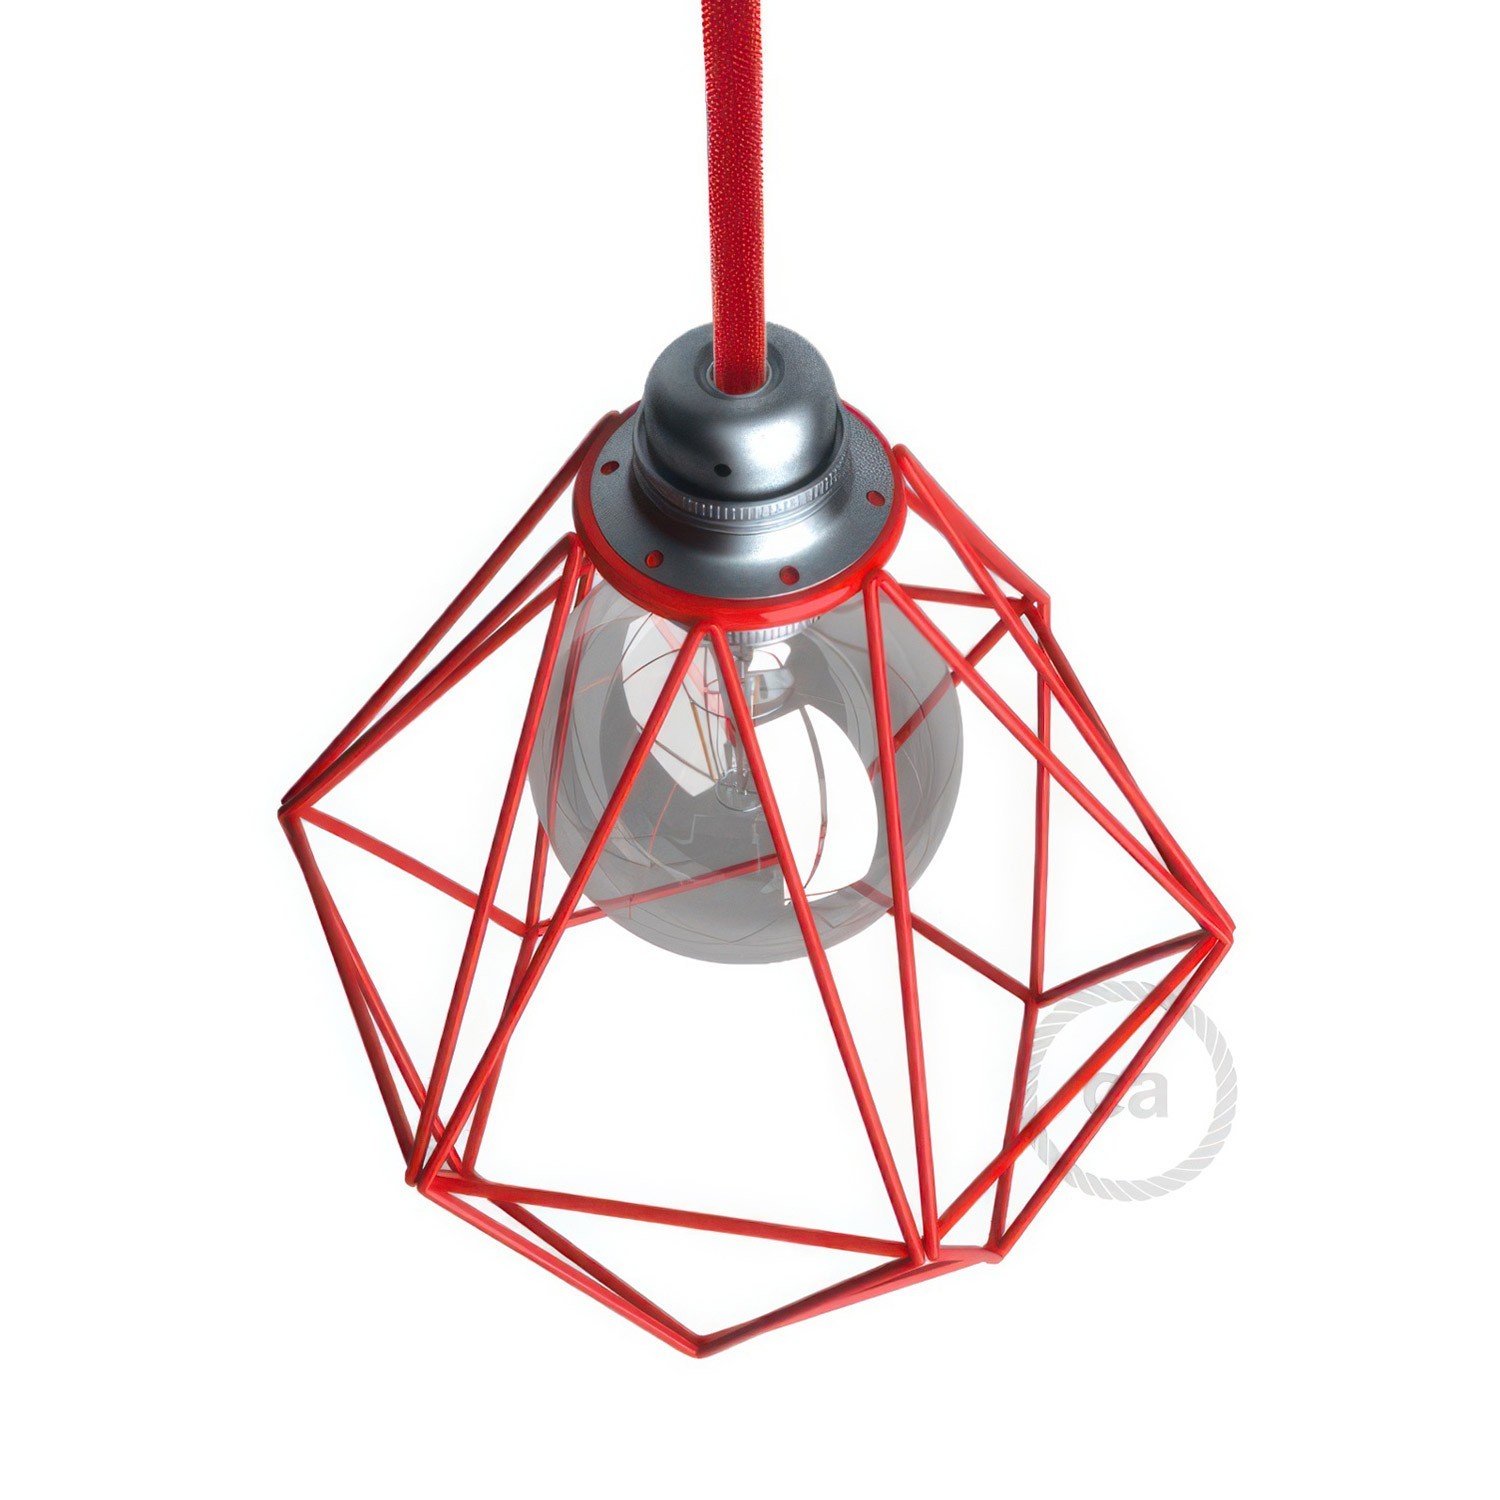 Naked light bulb cage metal lampshade Diamond for E27 fitting